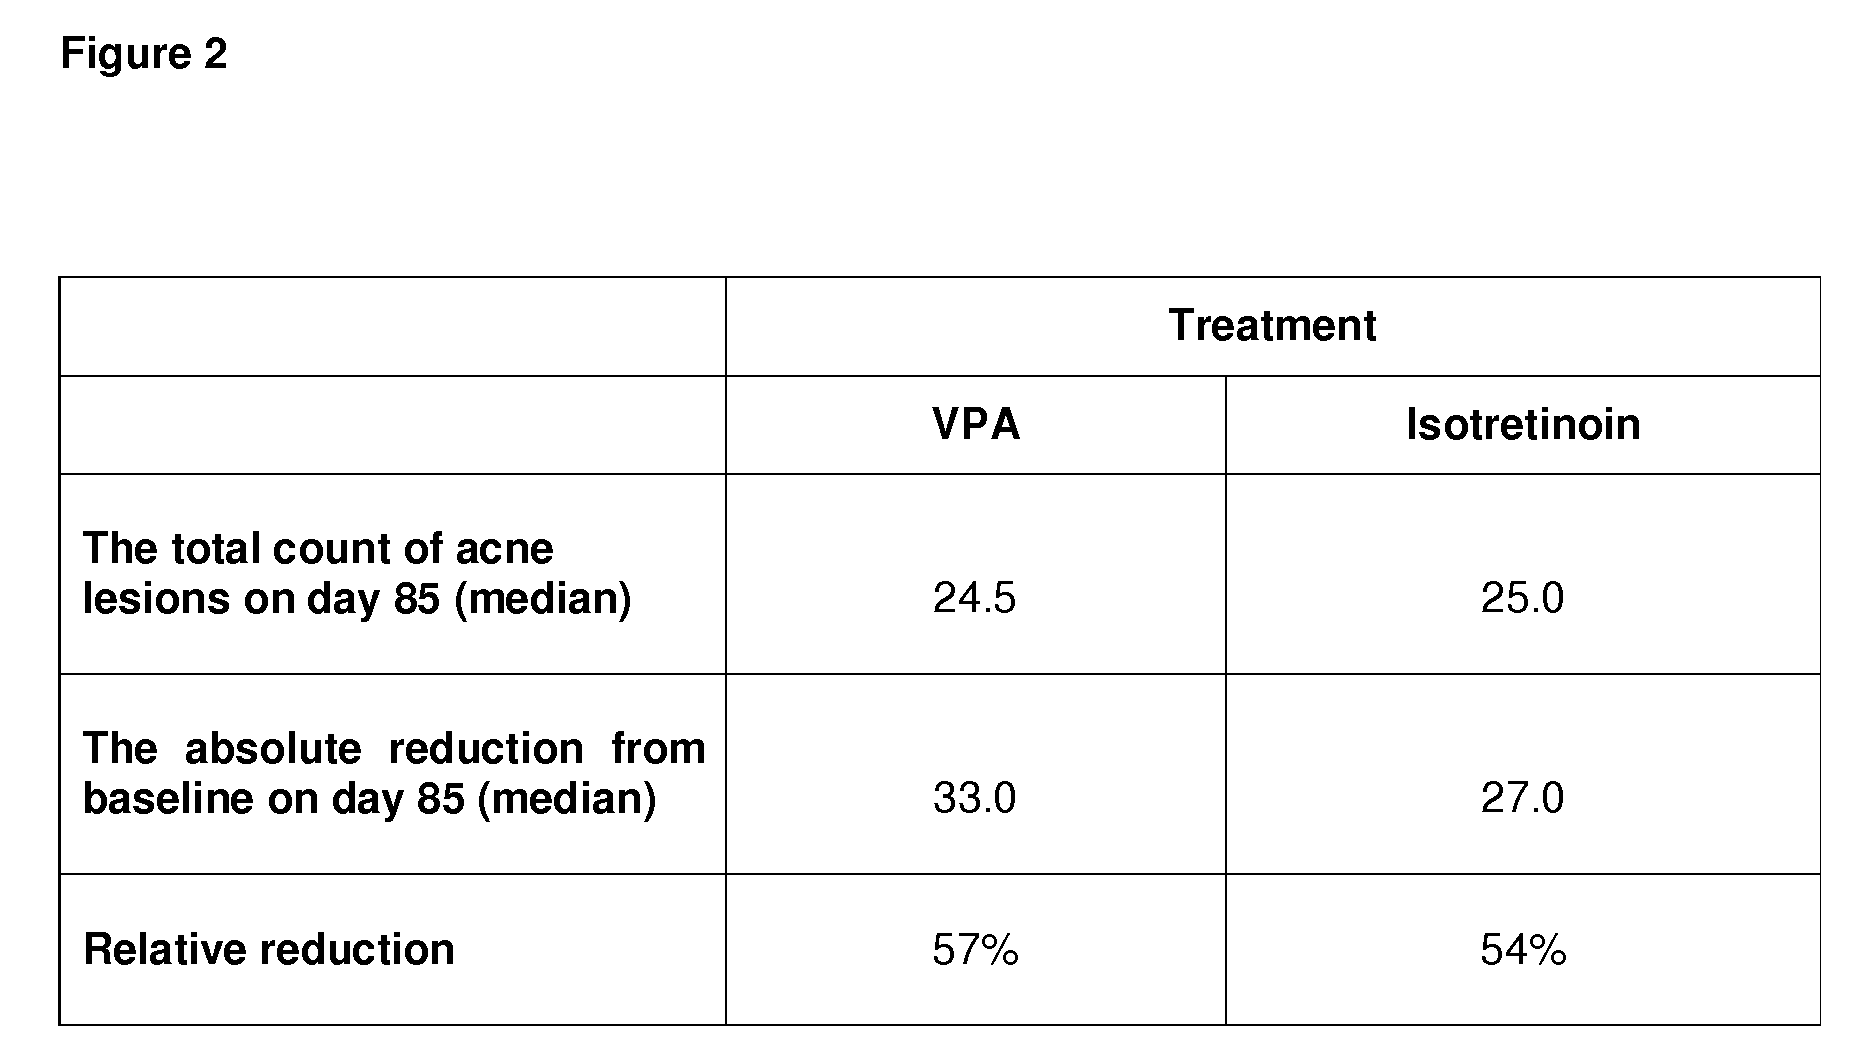 Use of valproic acid for the topical treatment of mild to moderate acne vulgaris